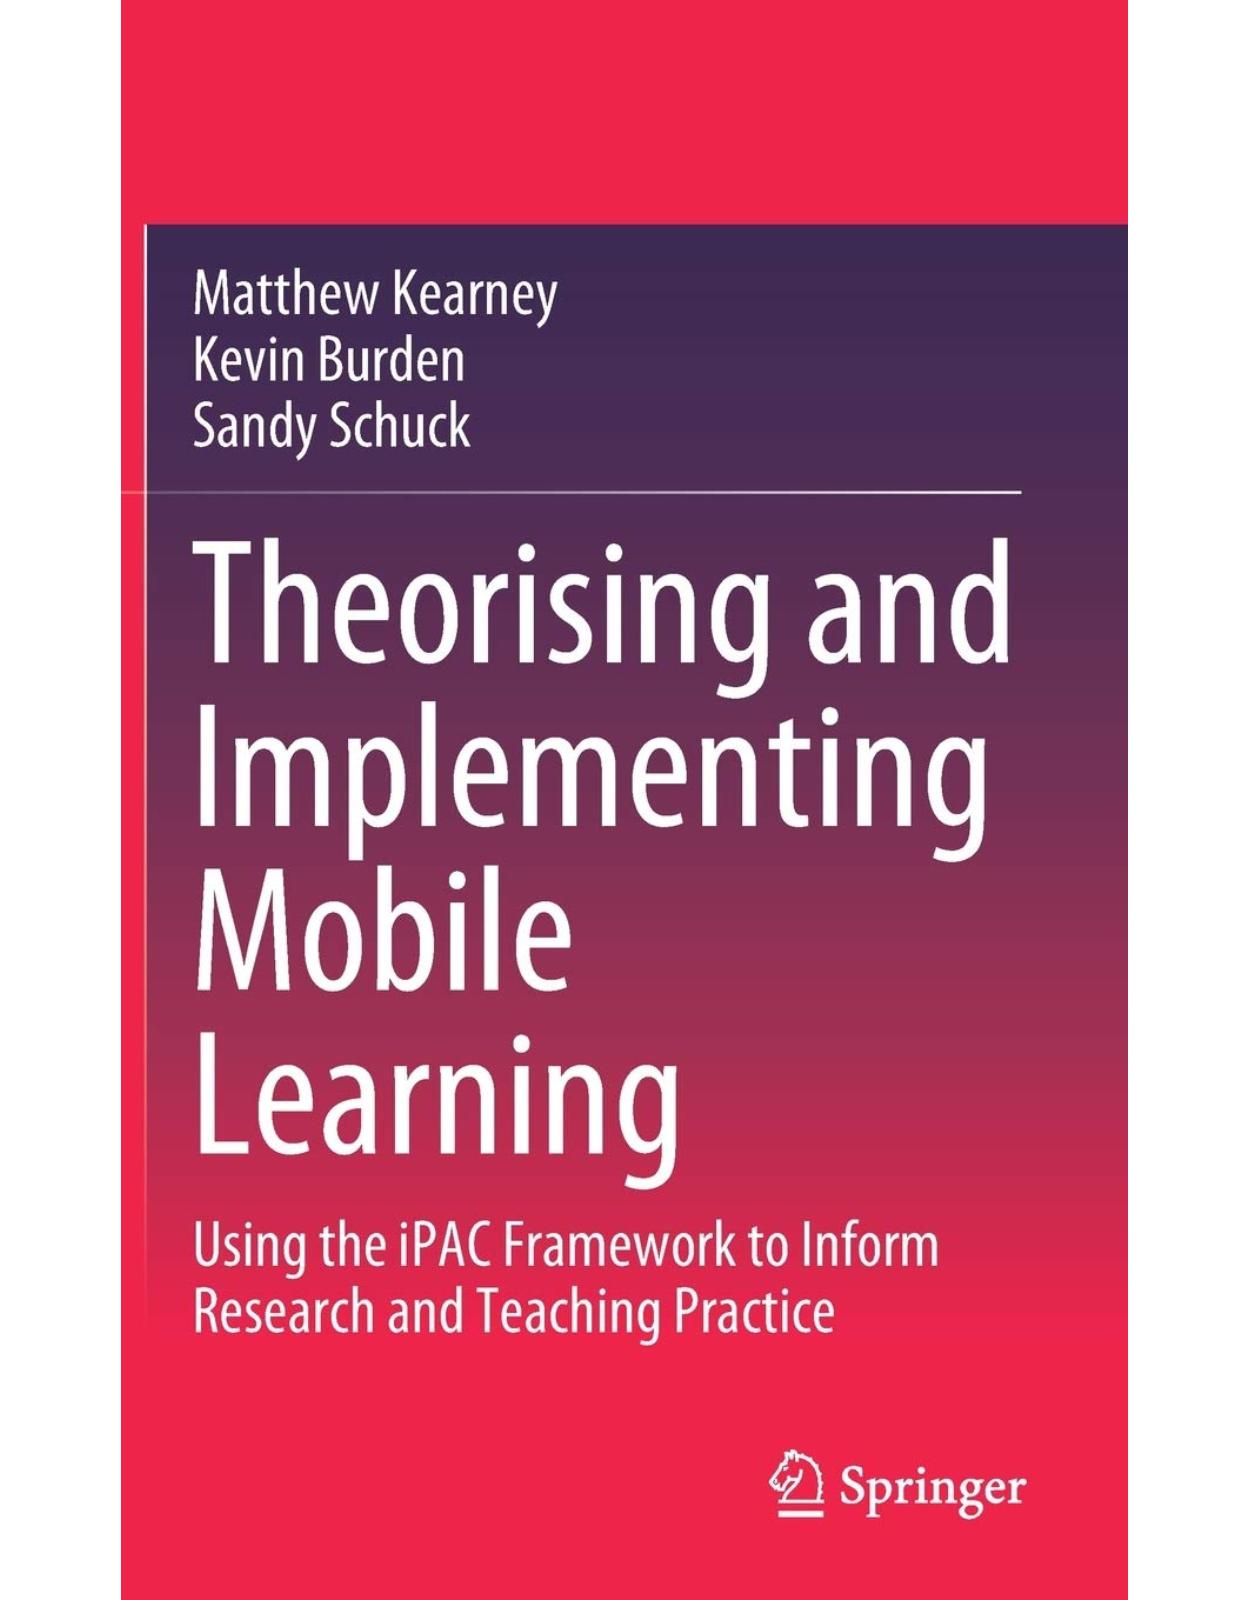 Theorising and Implementing Mobile Learning: Using the iPAC Framework to Inform Research and Teaching Practice